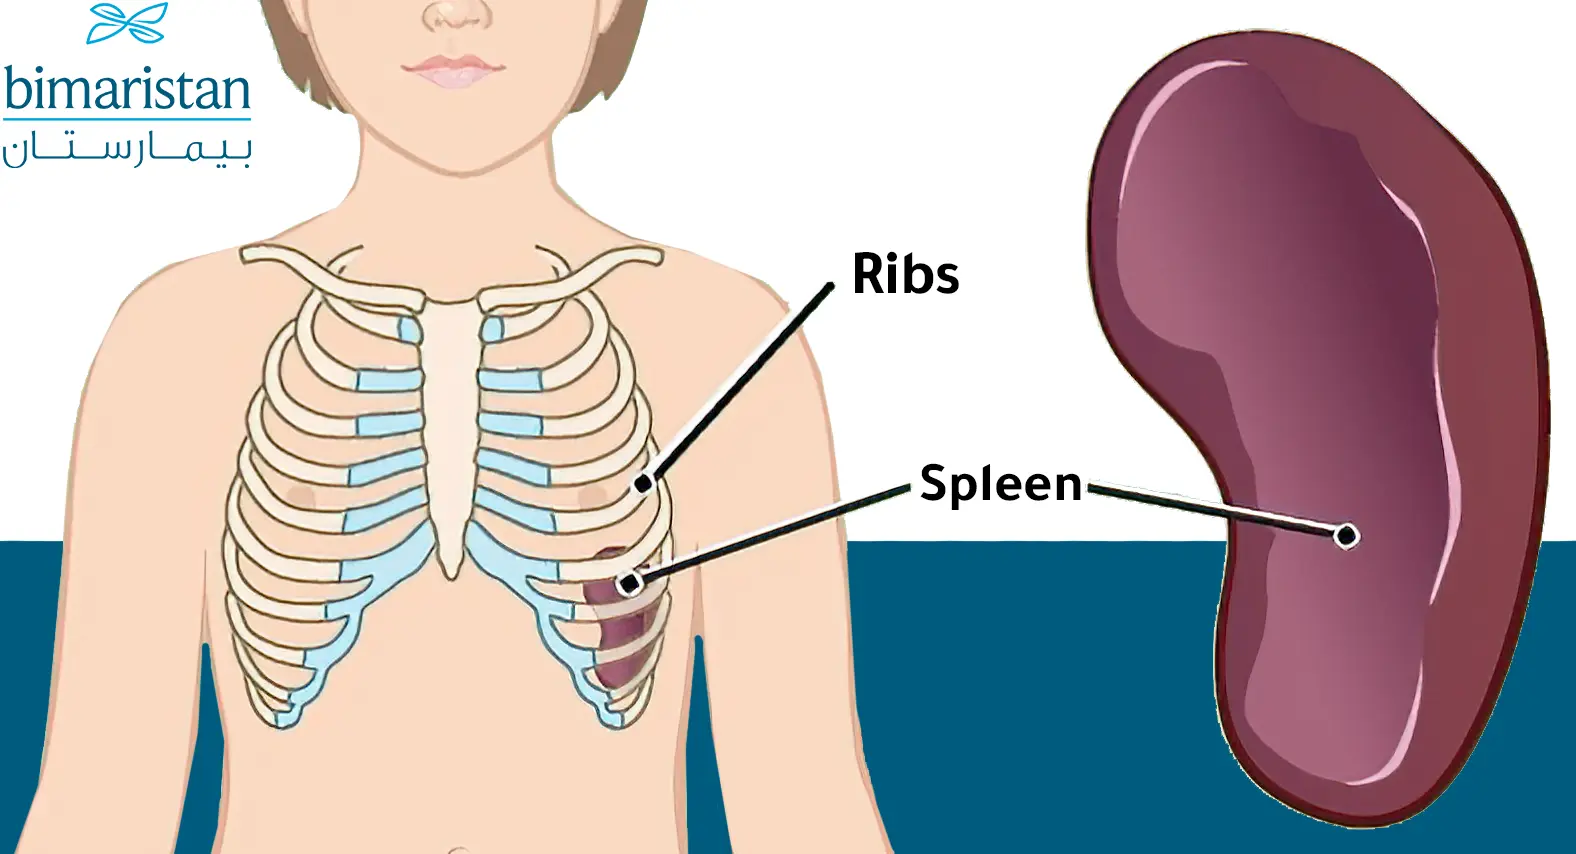 spleen location in the human body and its relationship to the ribs